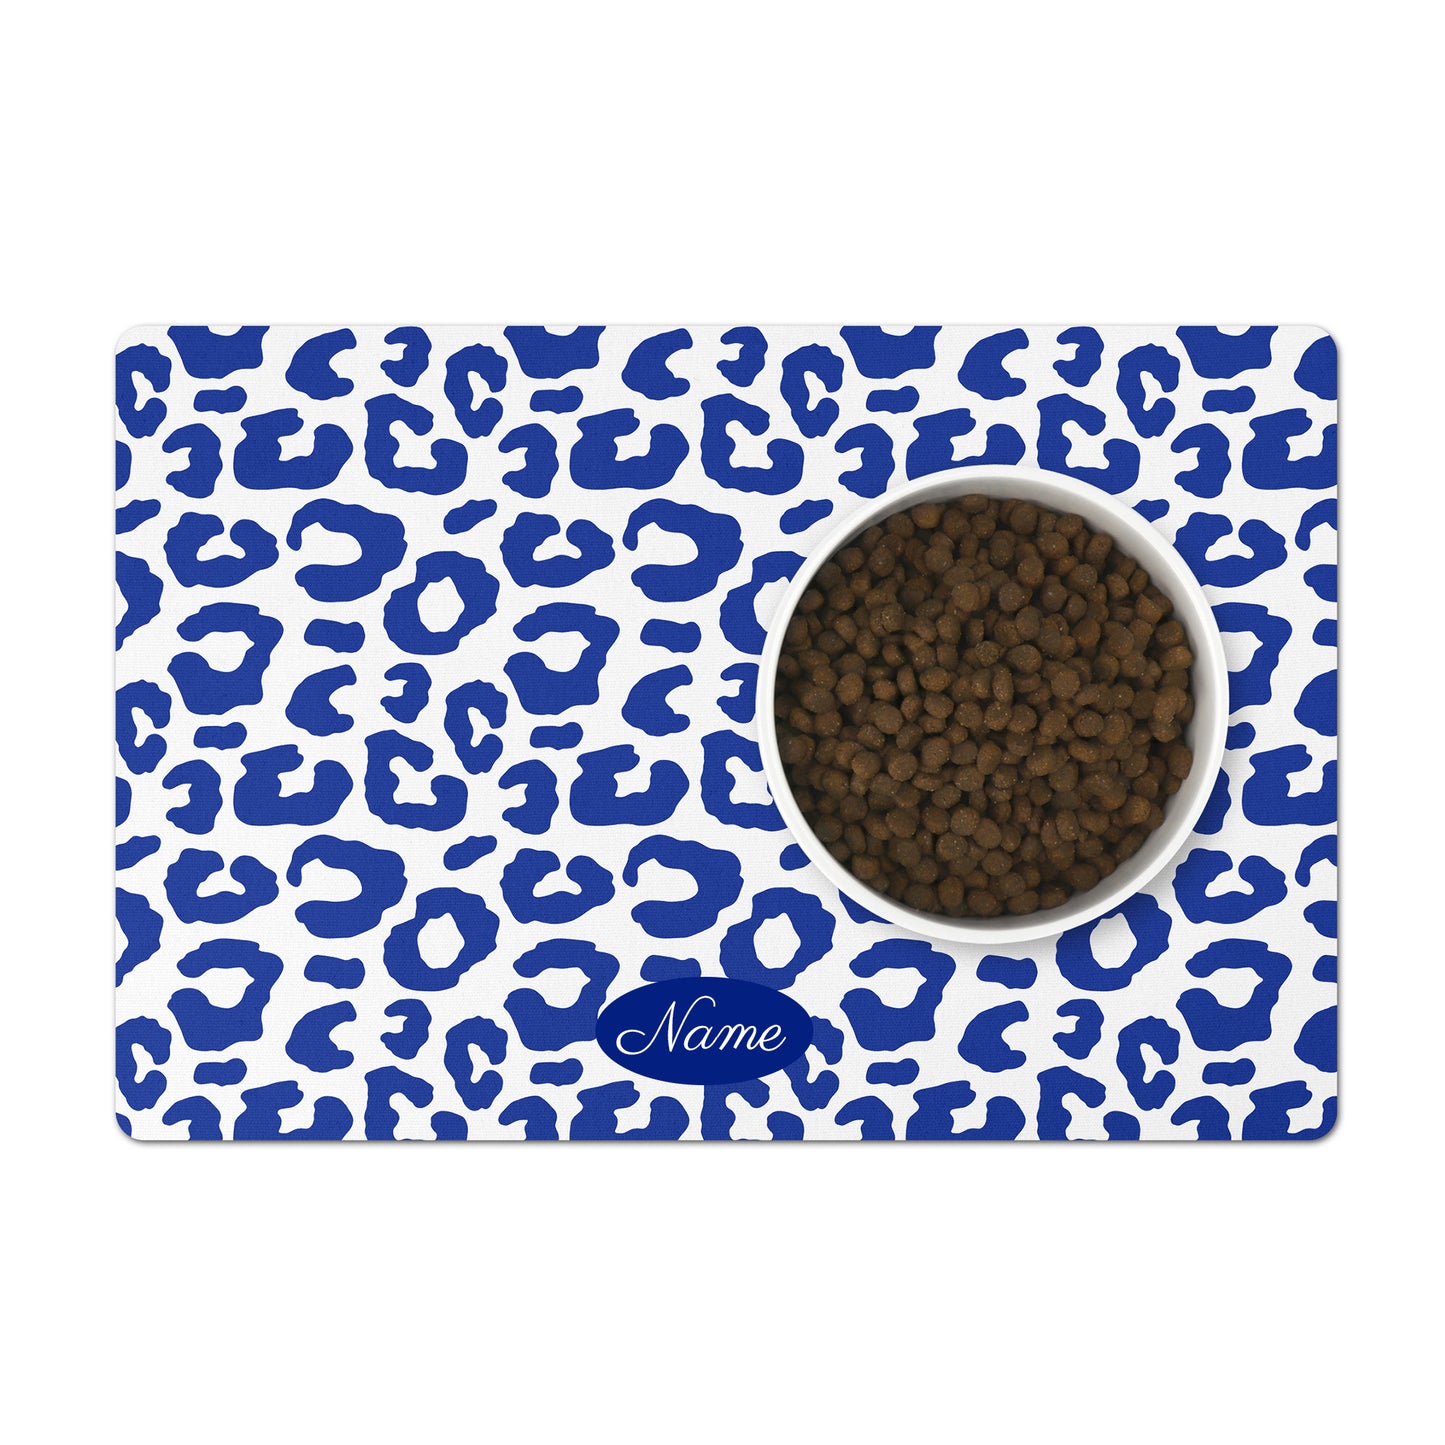 Personalized leopard pet food mat in indigo blue and white.